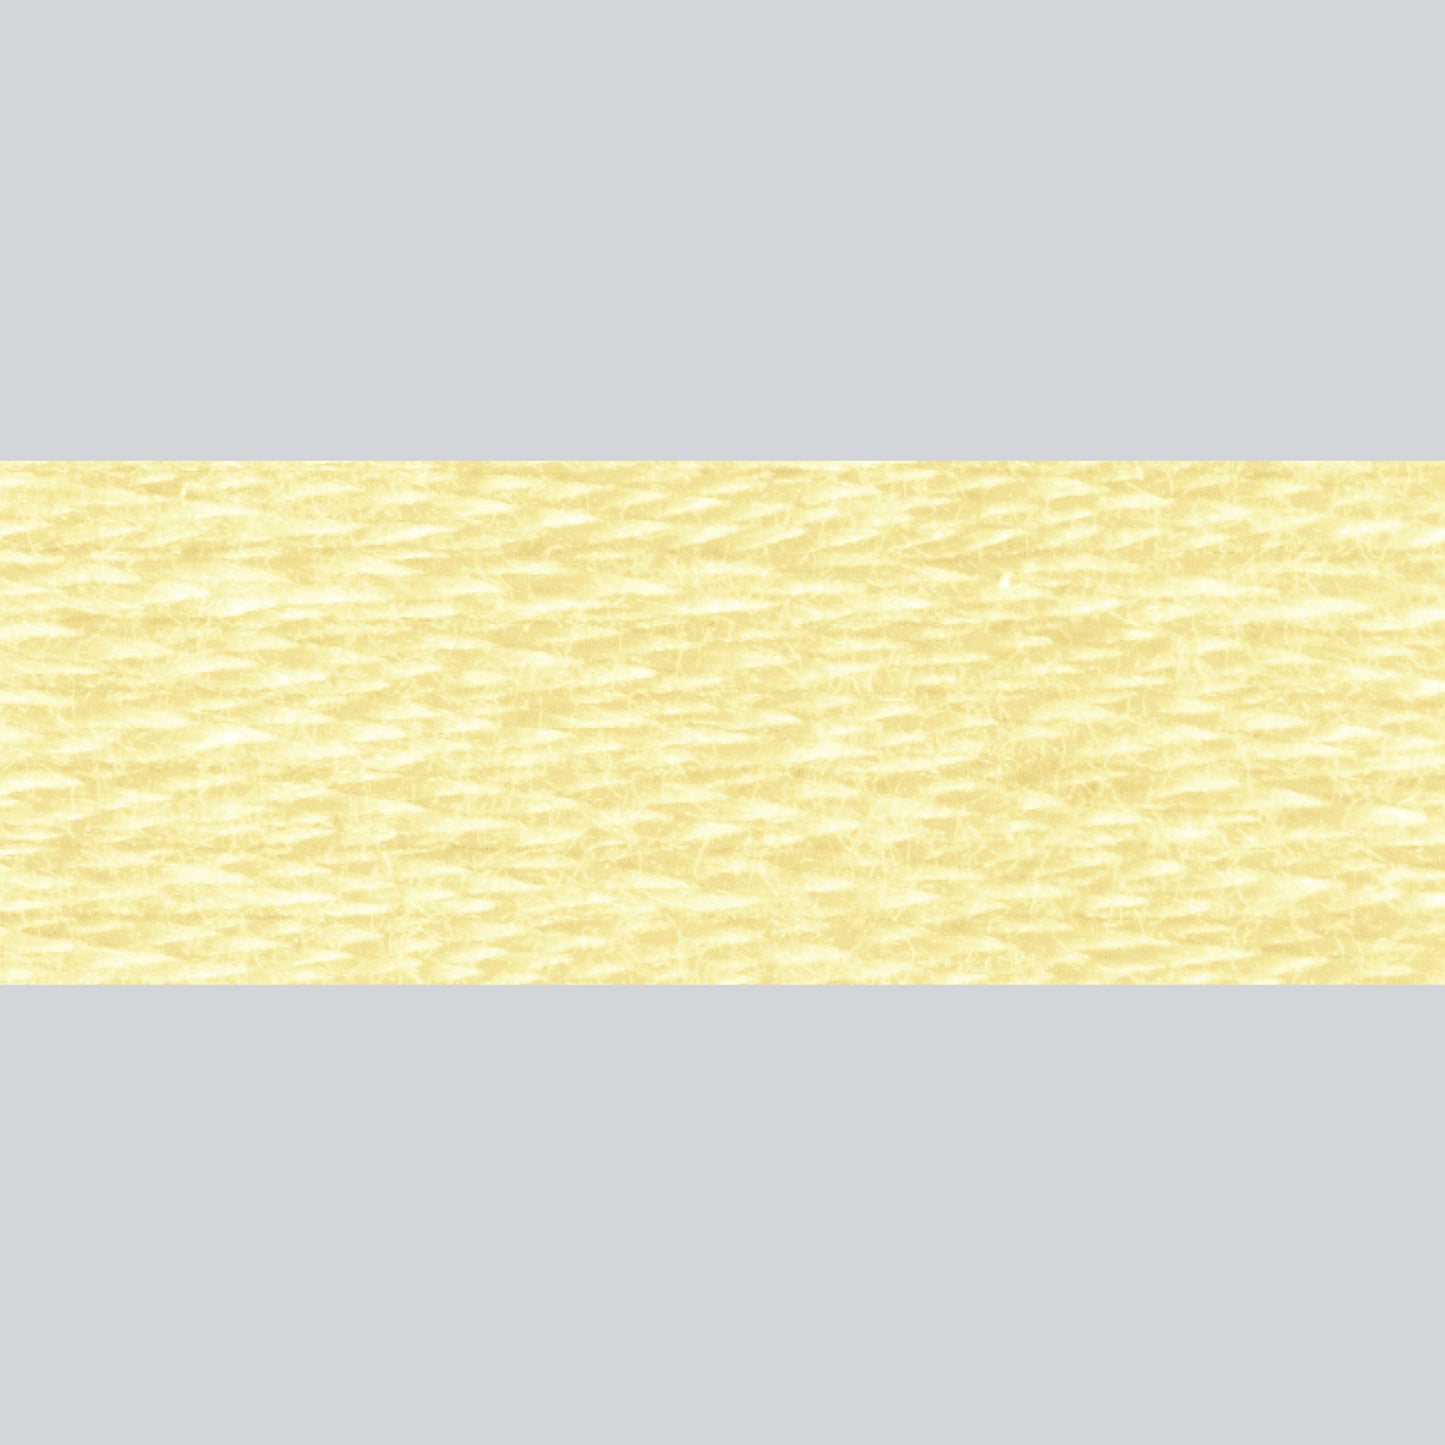 DMC Embroidery Floss - 677 Very Light Old Gold Alternative View #1